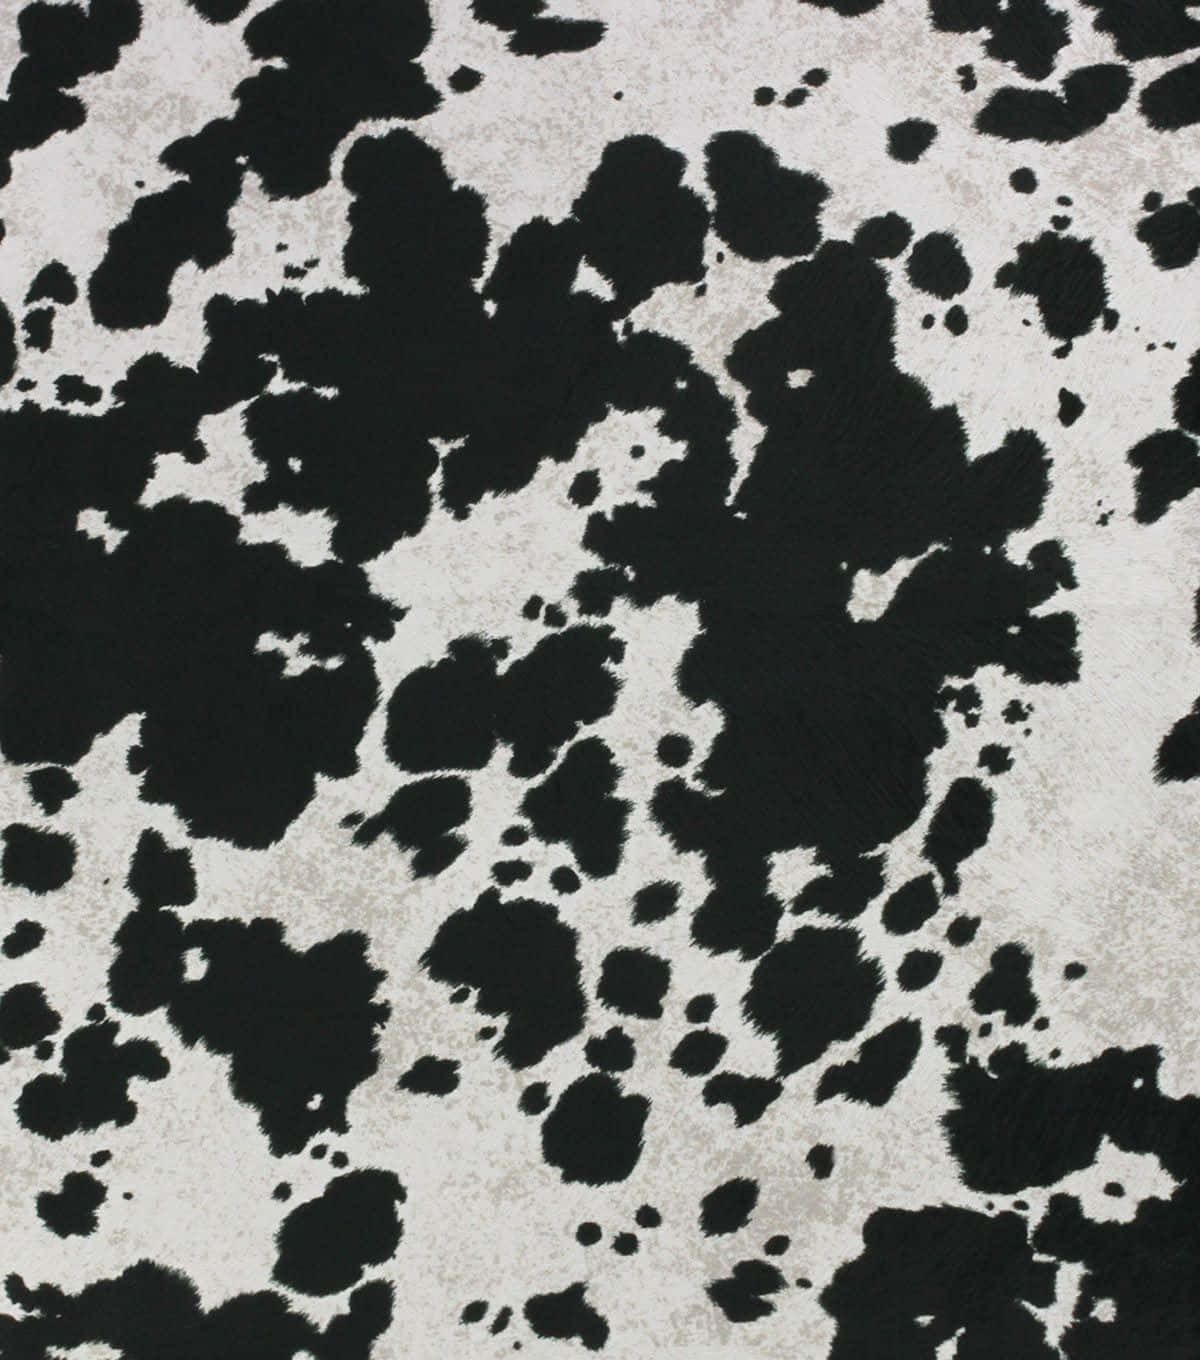 Dalmation Spots White And Black Cowhide Background